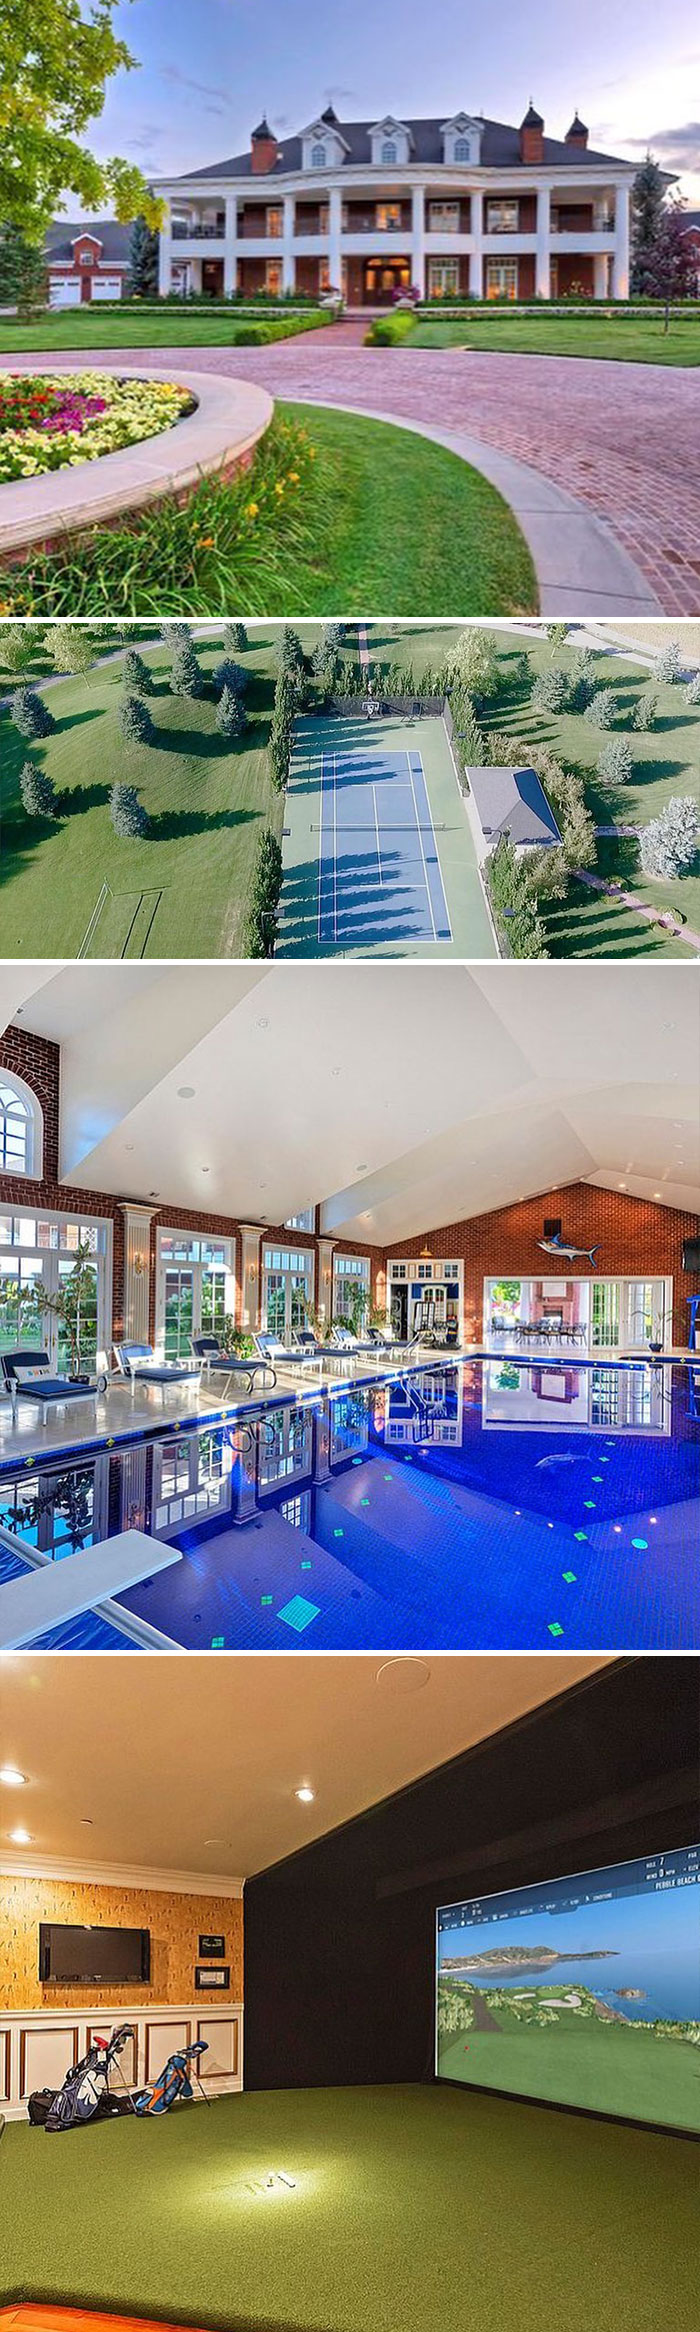 This Home Has It All Including A Pizza Oven. $16,000,000